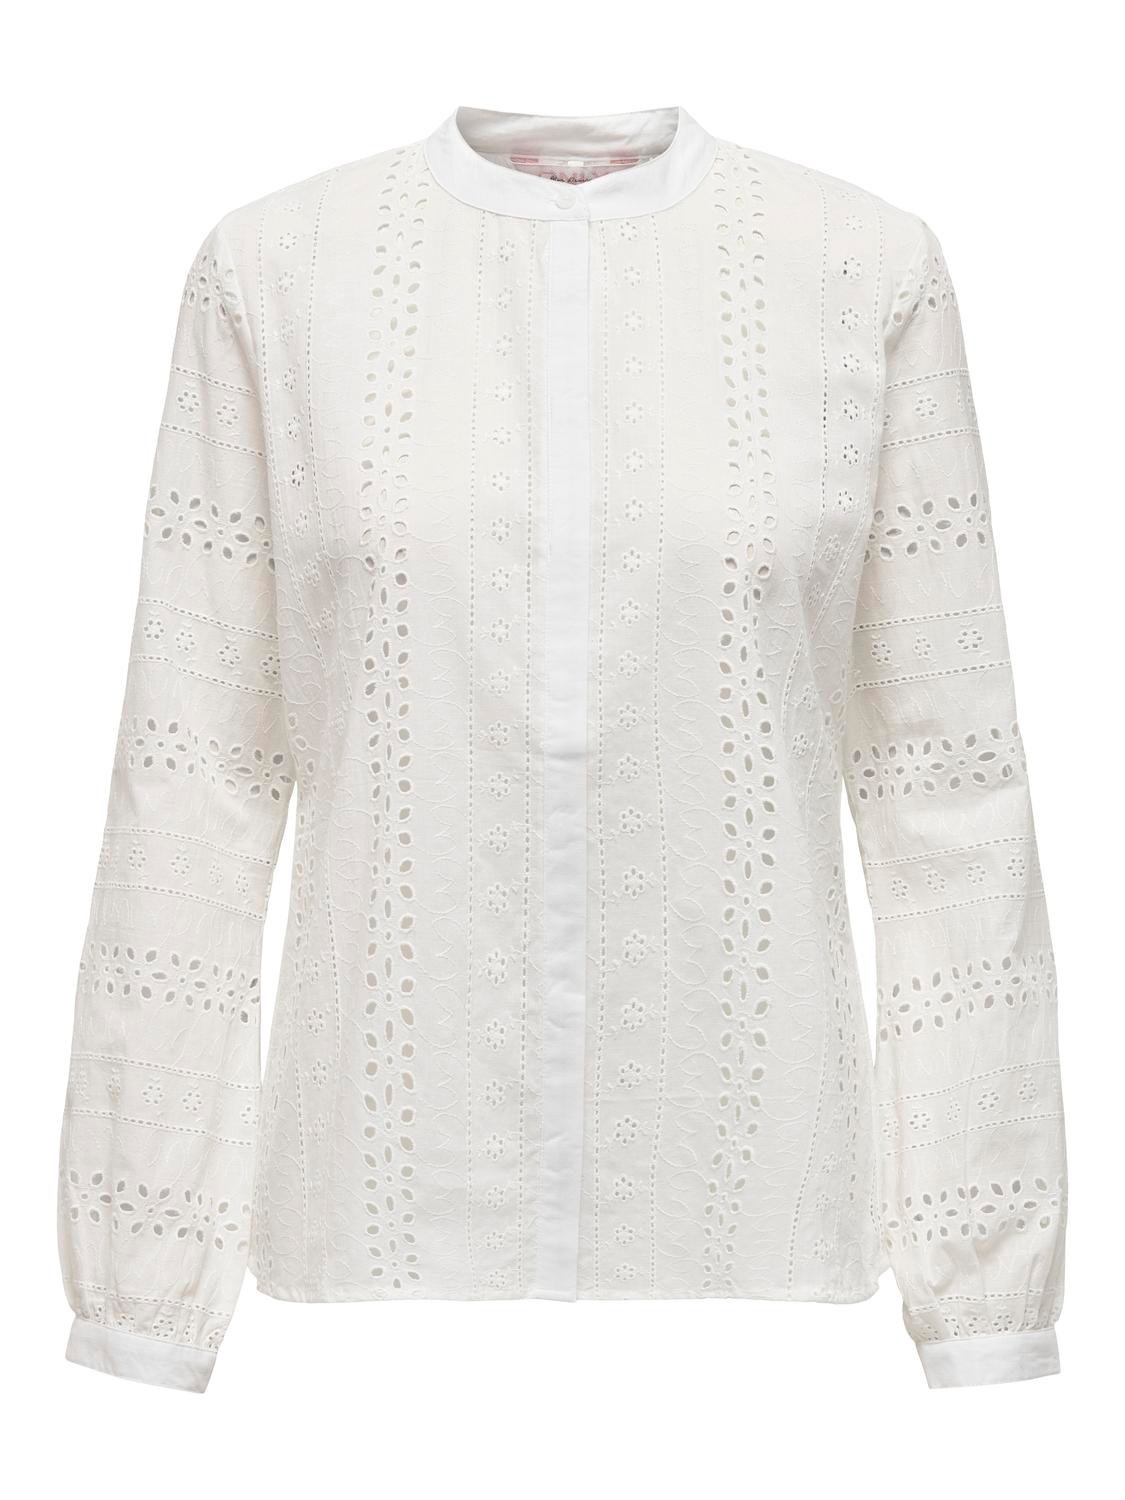 ONLY Embroidery Long sleeved shirt -Cloud Dancer - 15169835